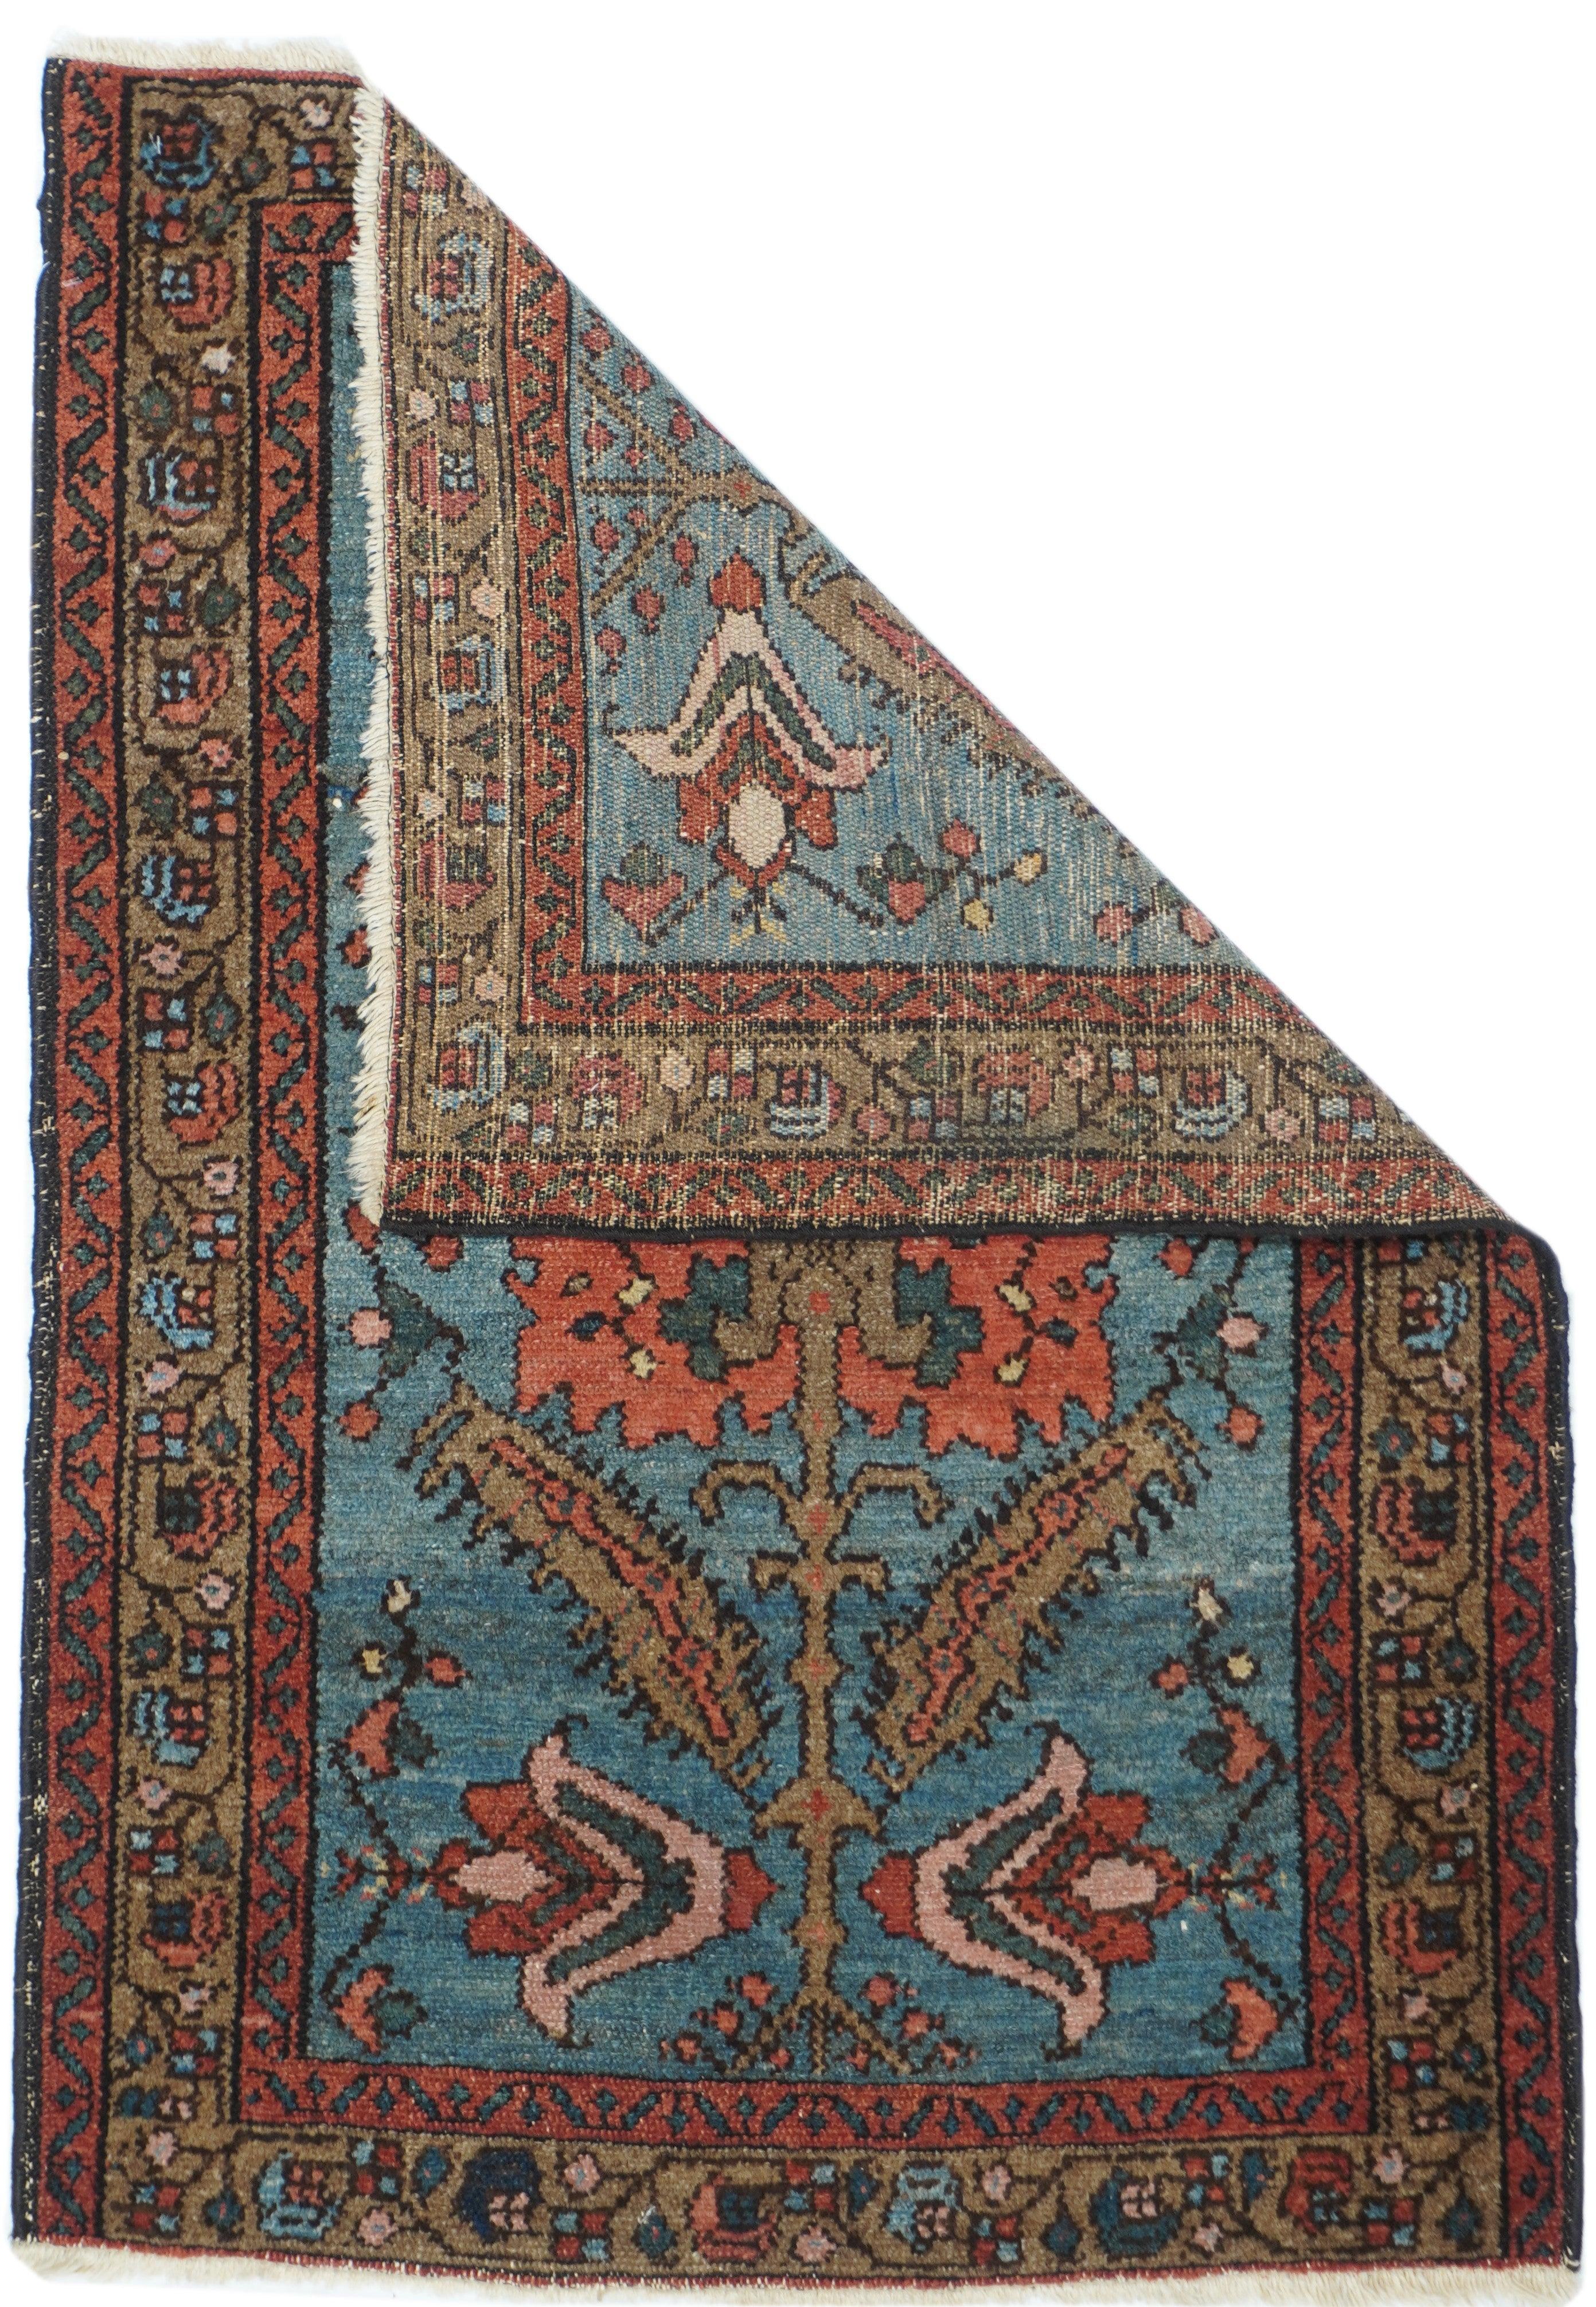 Antique Hamedan rug, measures : 2'5'' x 3'7''. This is a rare teal rustic Lilihan with a large salmon central ragged palmette enclosing a smaller petal palmette, with four lazy ivory petal corner flowers. Rose main border with profile rosettes,